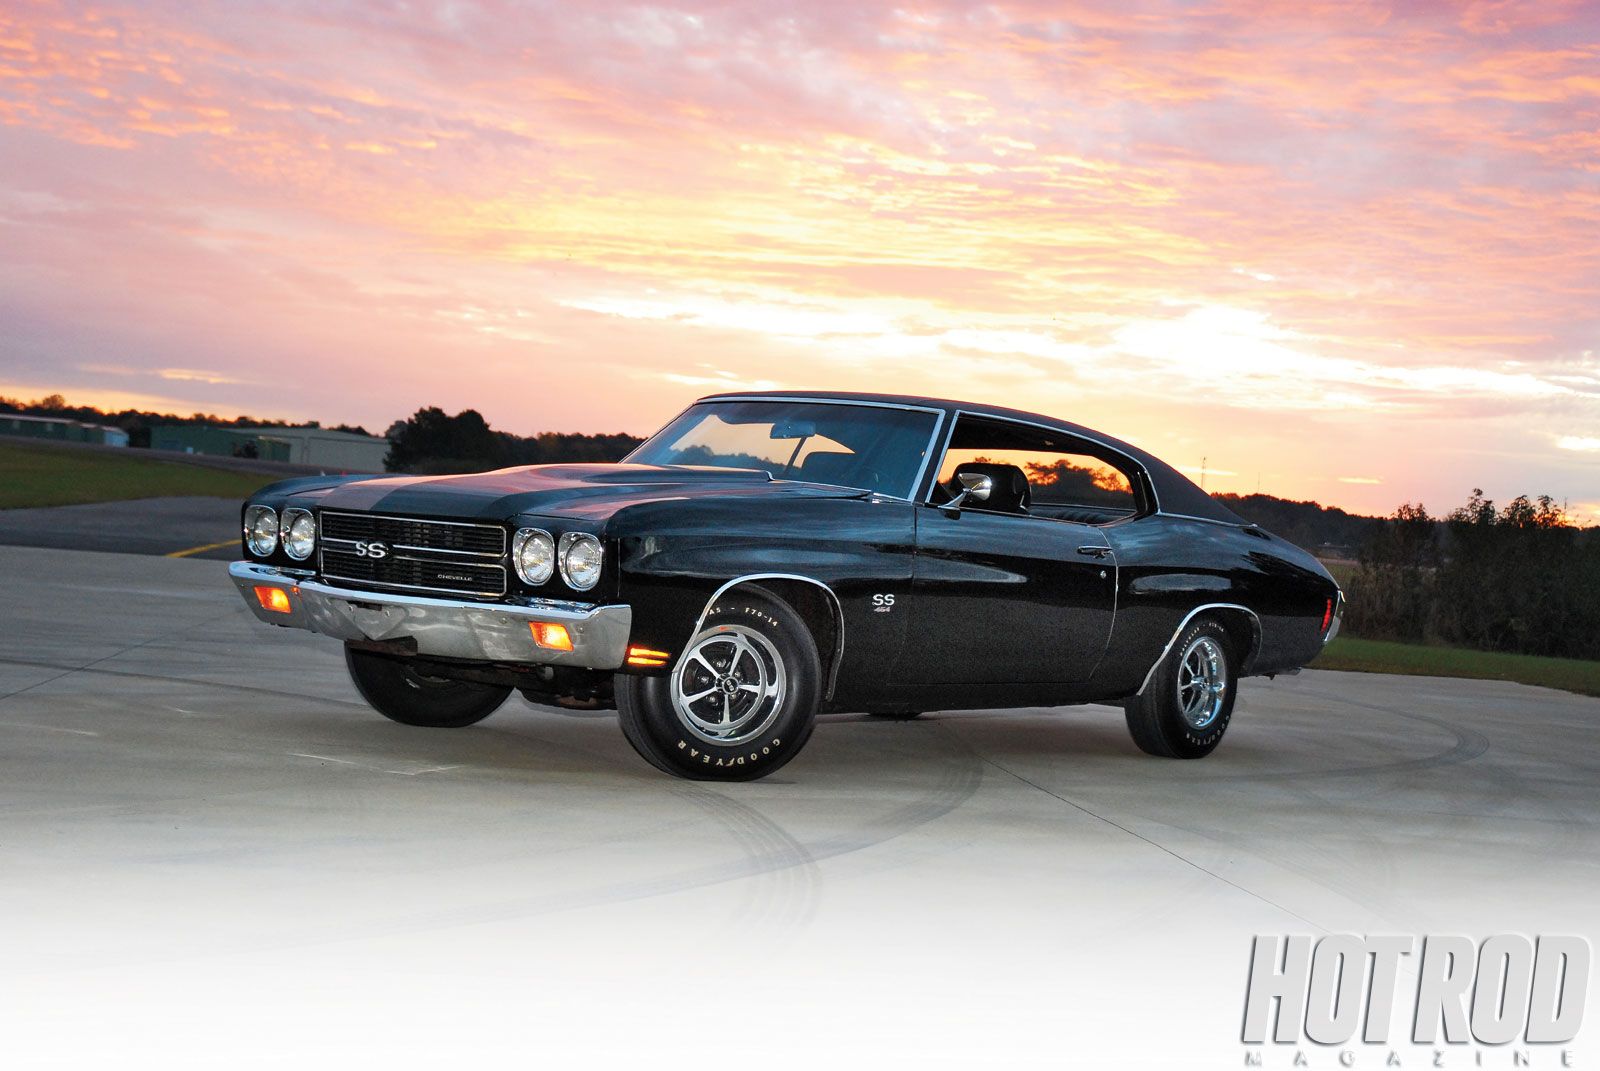 1970 CHEVY CHEVELLE SS 454 Computer Wallpapers Desktop Backgrounds 1600x1071